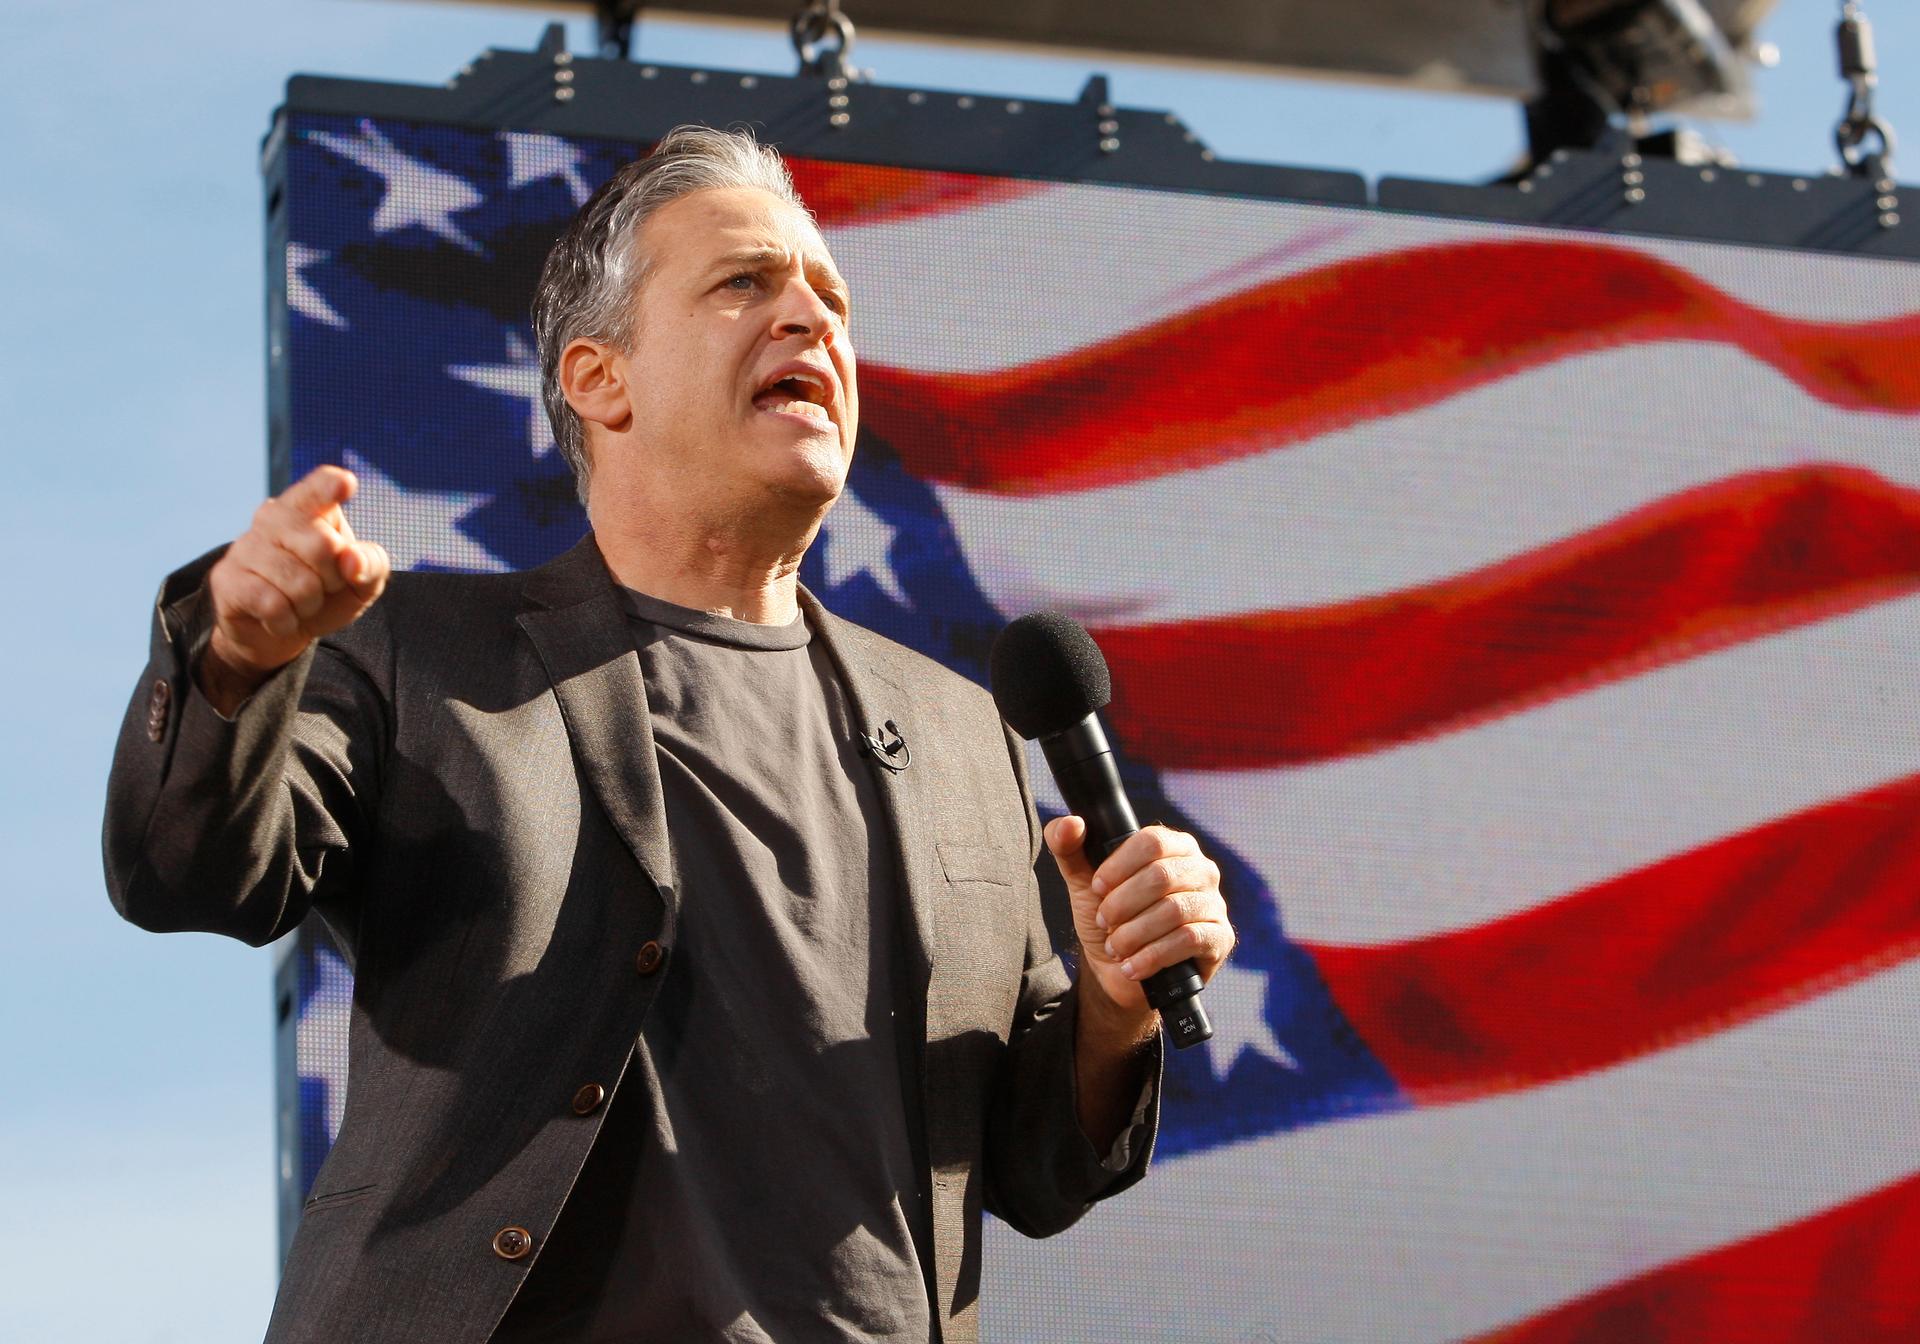 Comedian Jon Stewart addresses the crowd during the "Rally to Restore Sanity and/or Fear" in Washington, October 30, 2010.